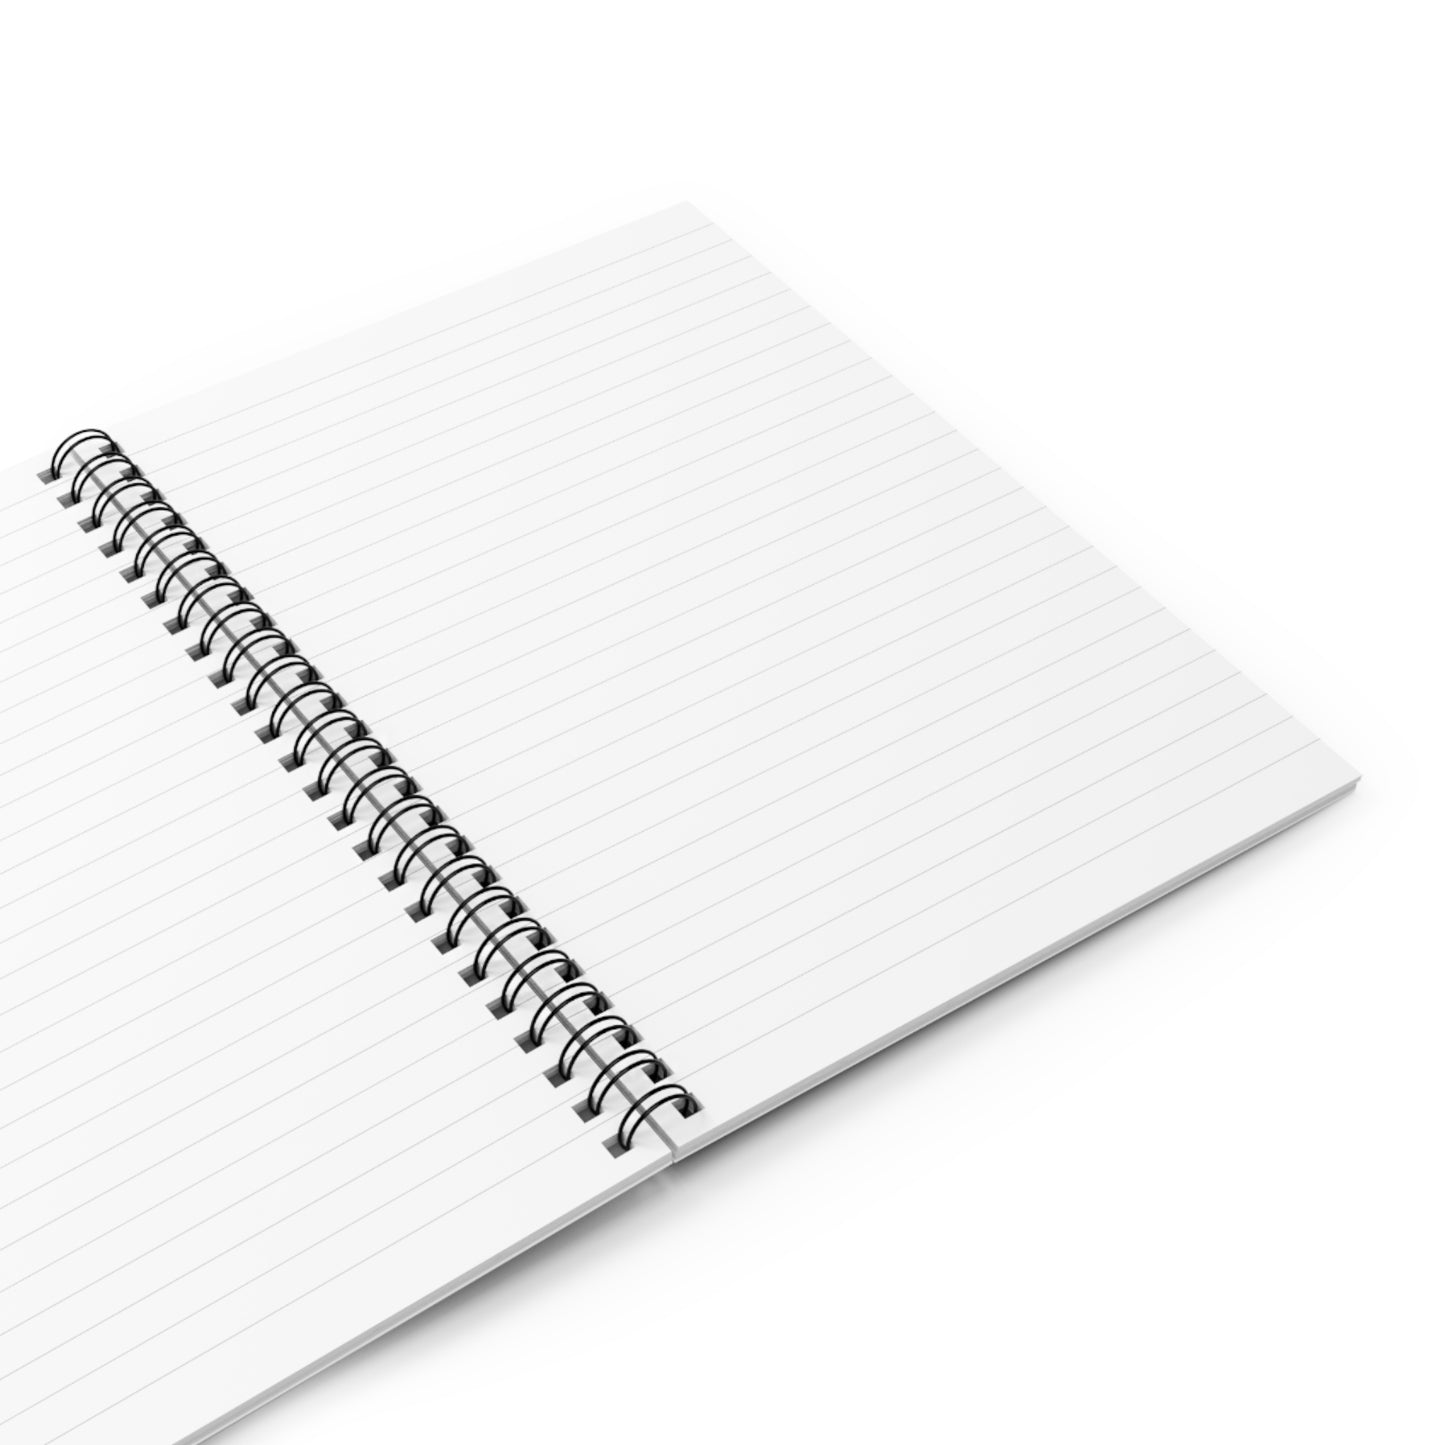 WOA Personalized Spiral Notebook - Ruled Line | FREE SHIPPING!